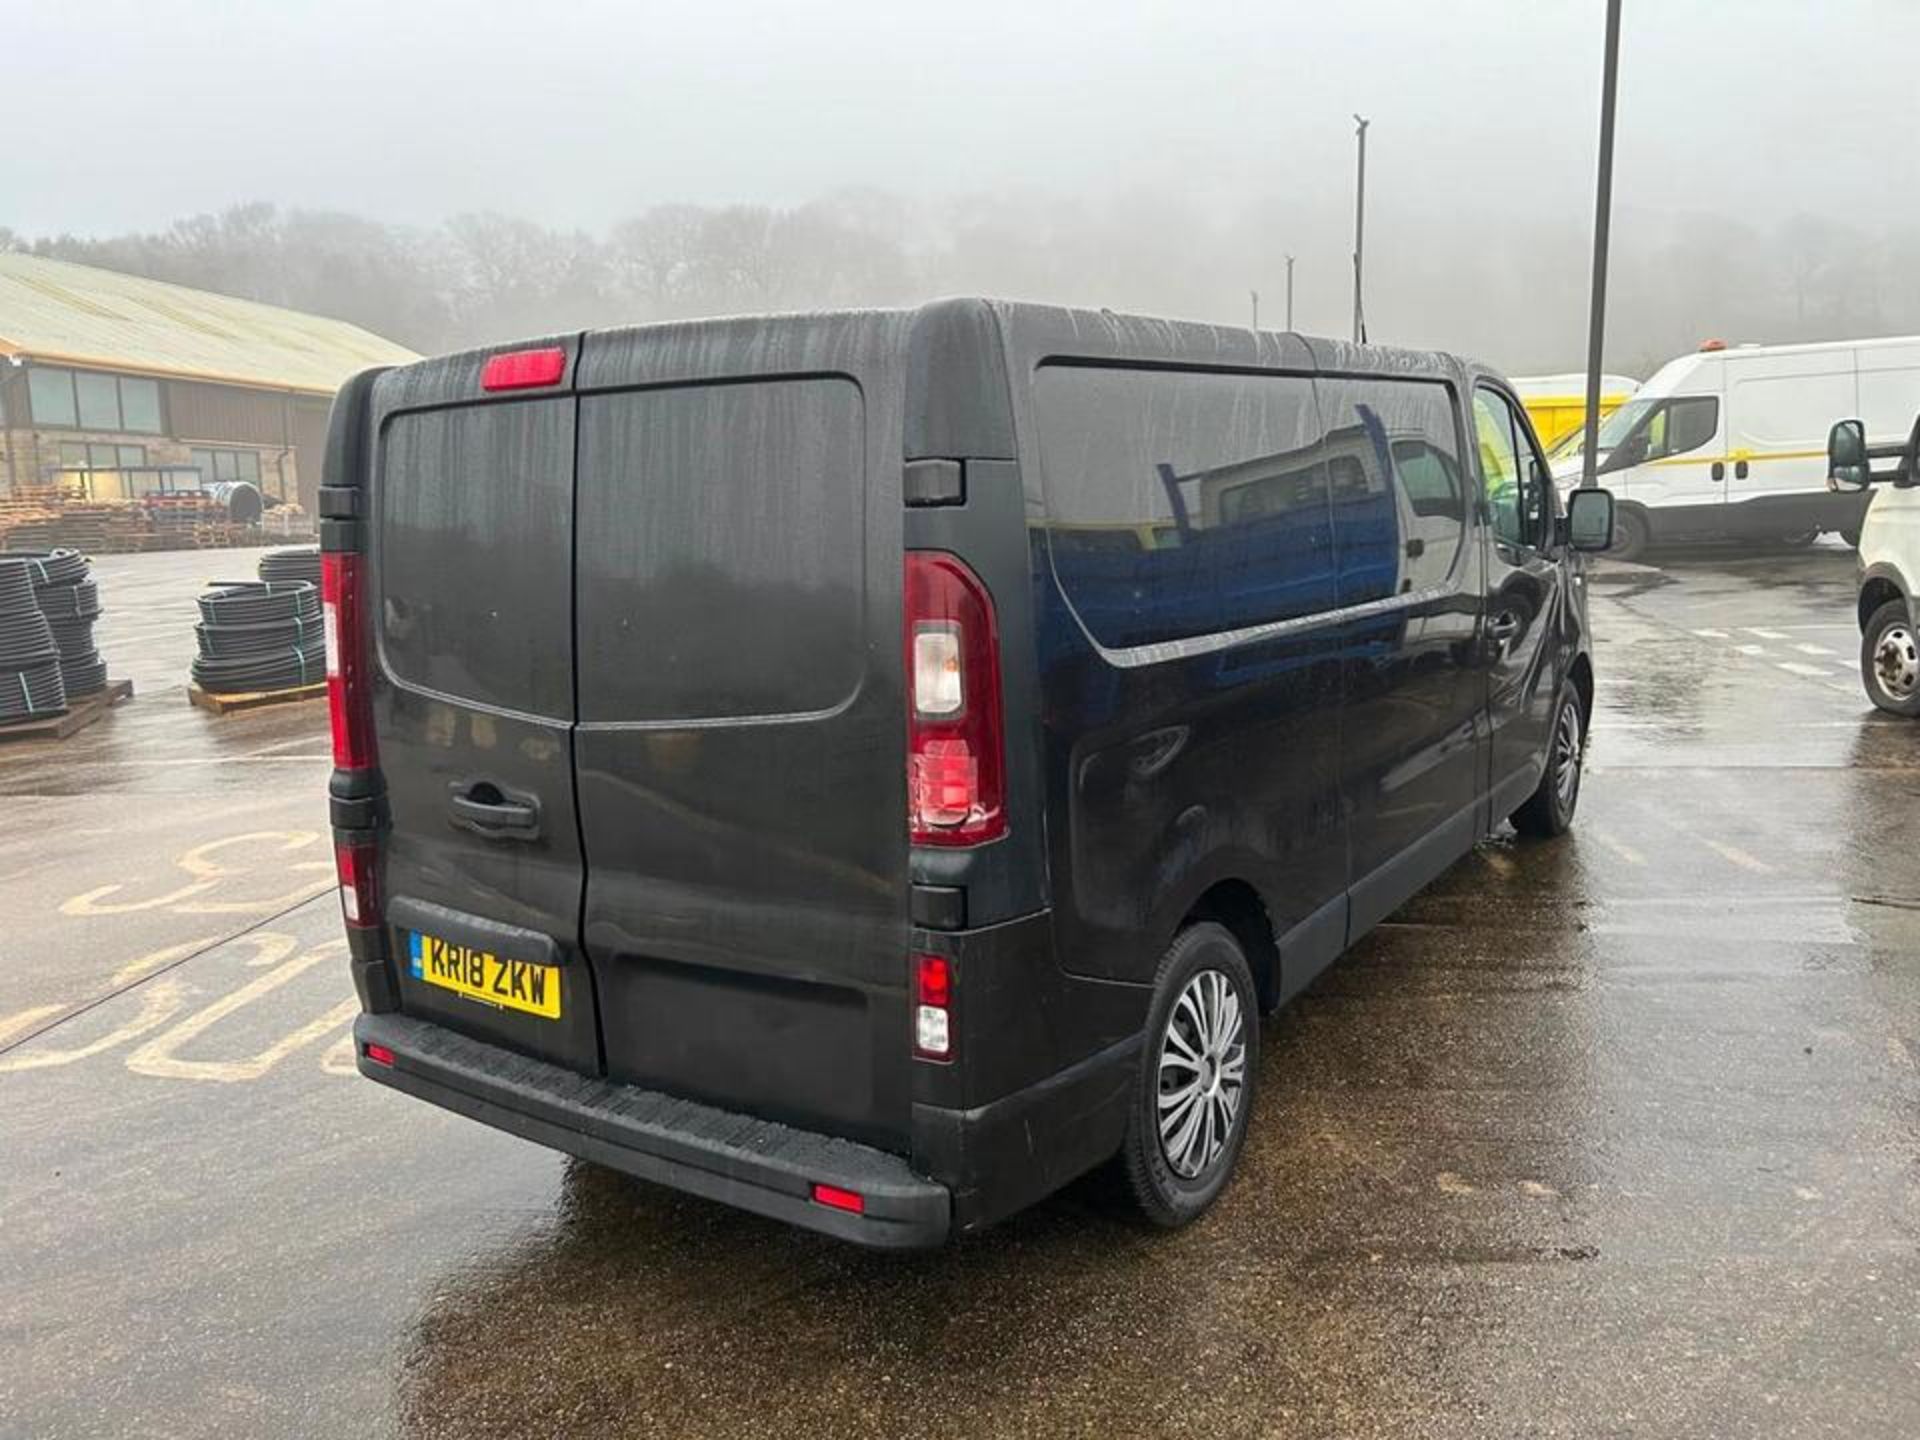 2018 VAUXHALL VIVARO SPORTIVE - 152K MILES- HPI CLEAR- READY FOR ACTION! - Image 2 of 10